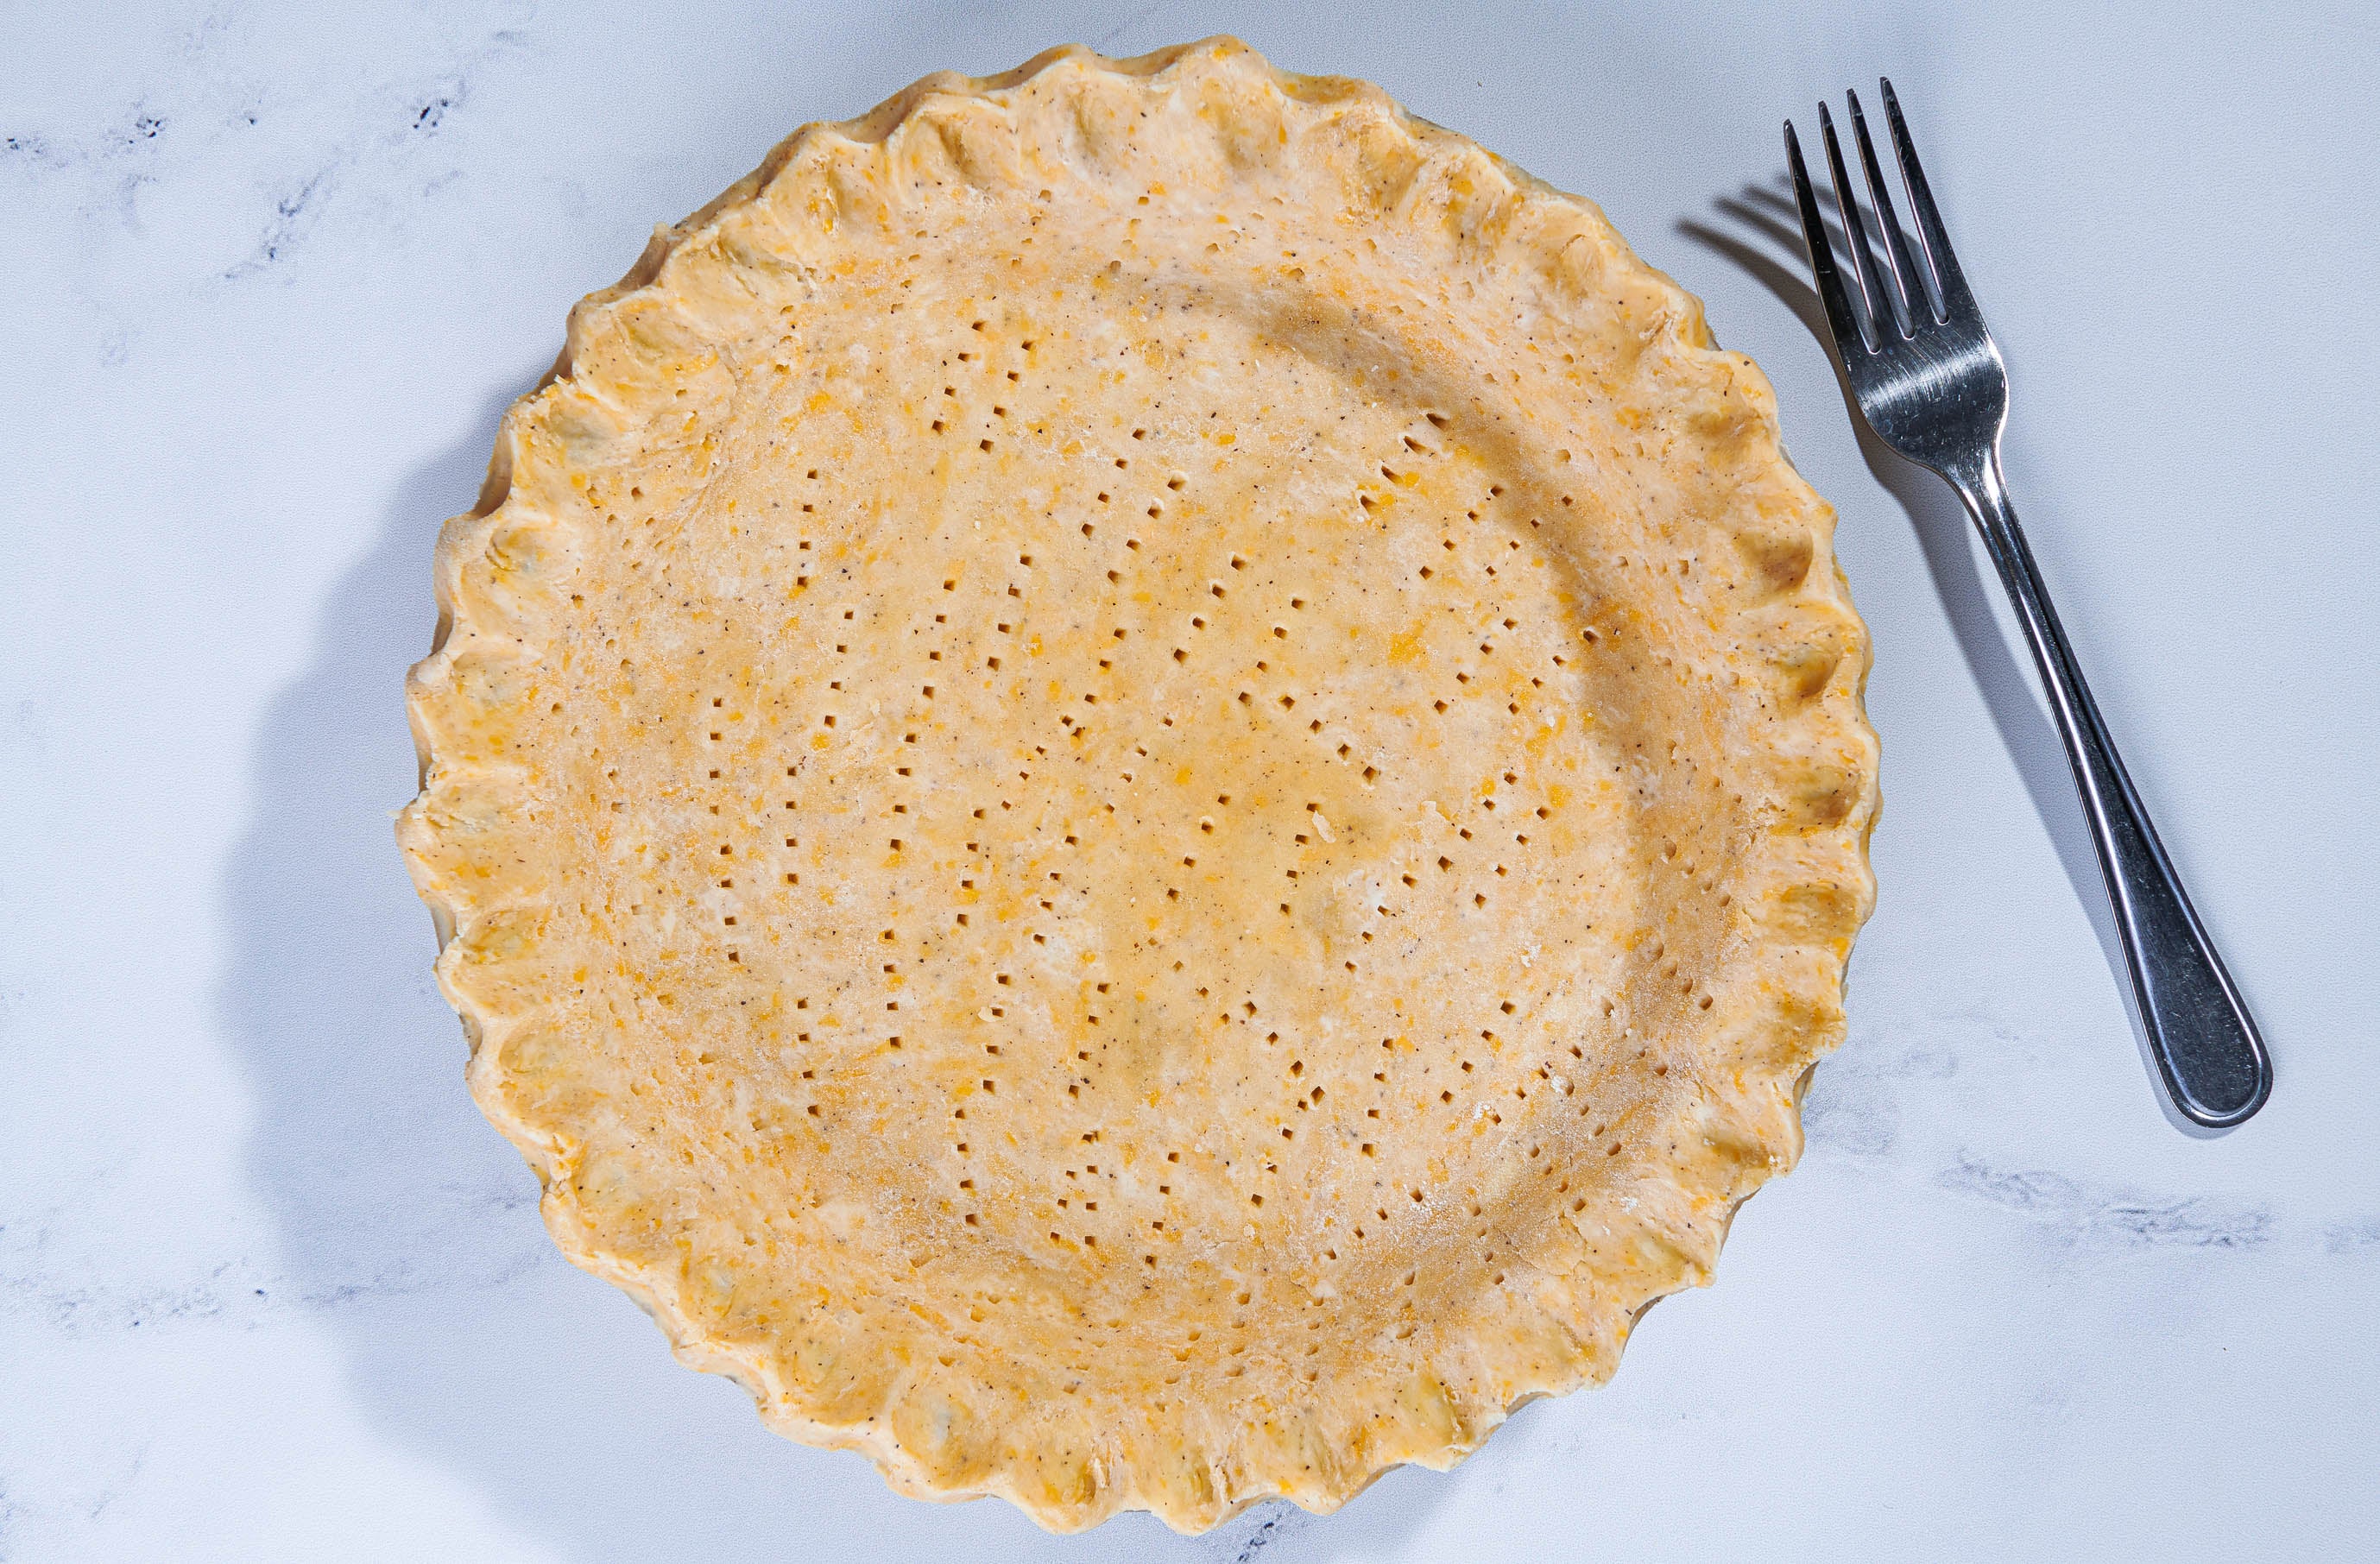 Making your own pie crust is the star of the show here